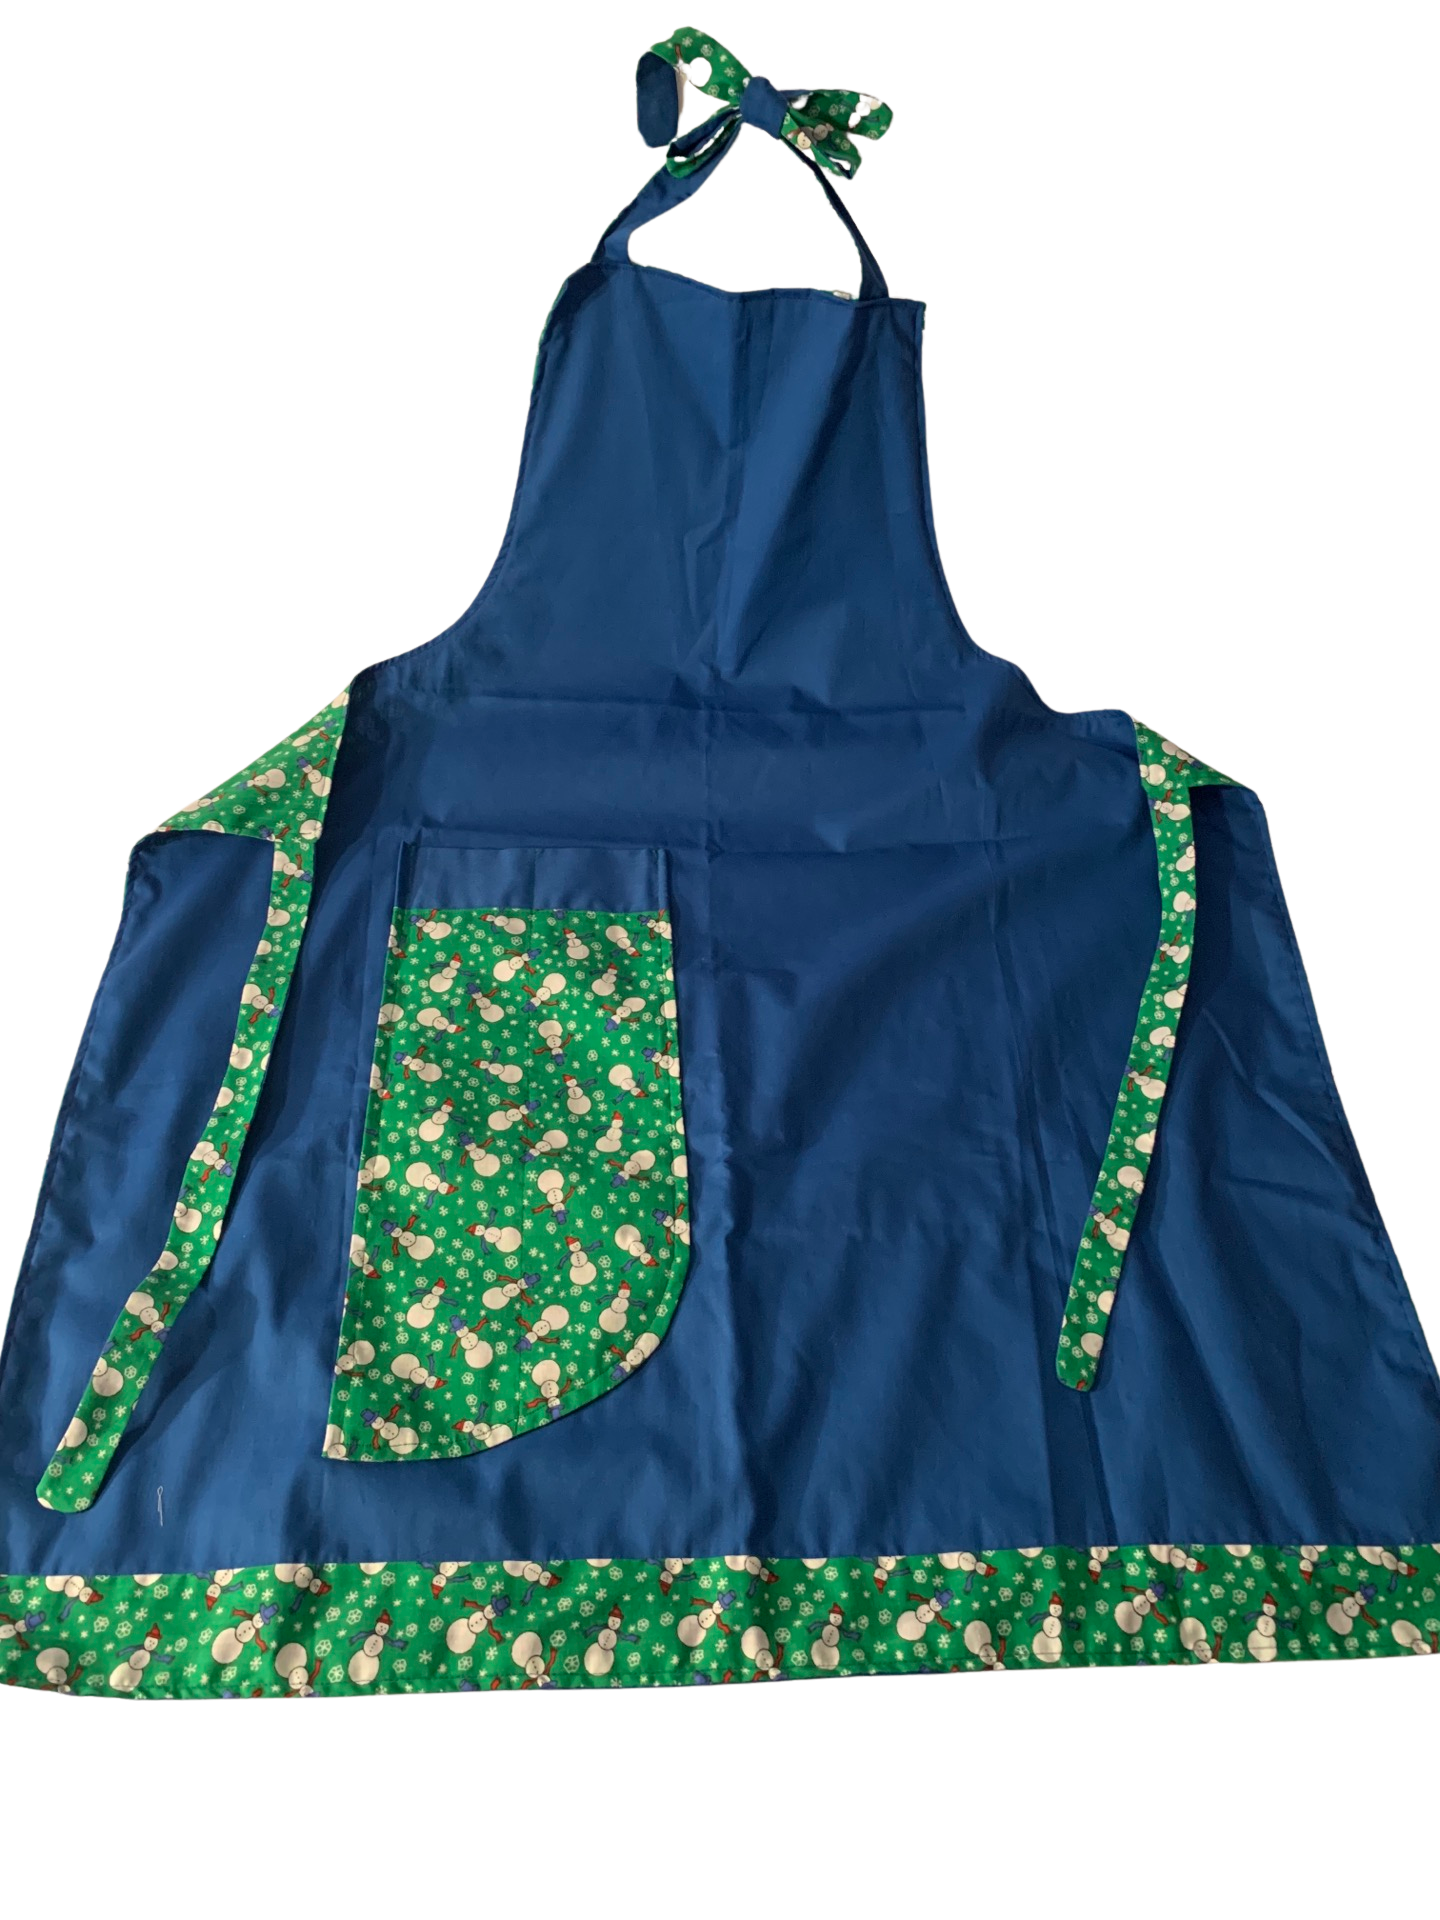 Adult Reversible Christmas Apron. Fun snowman print with blue on reverse side. Large pockets on both sides. Washable